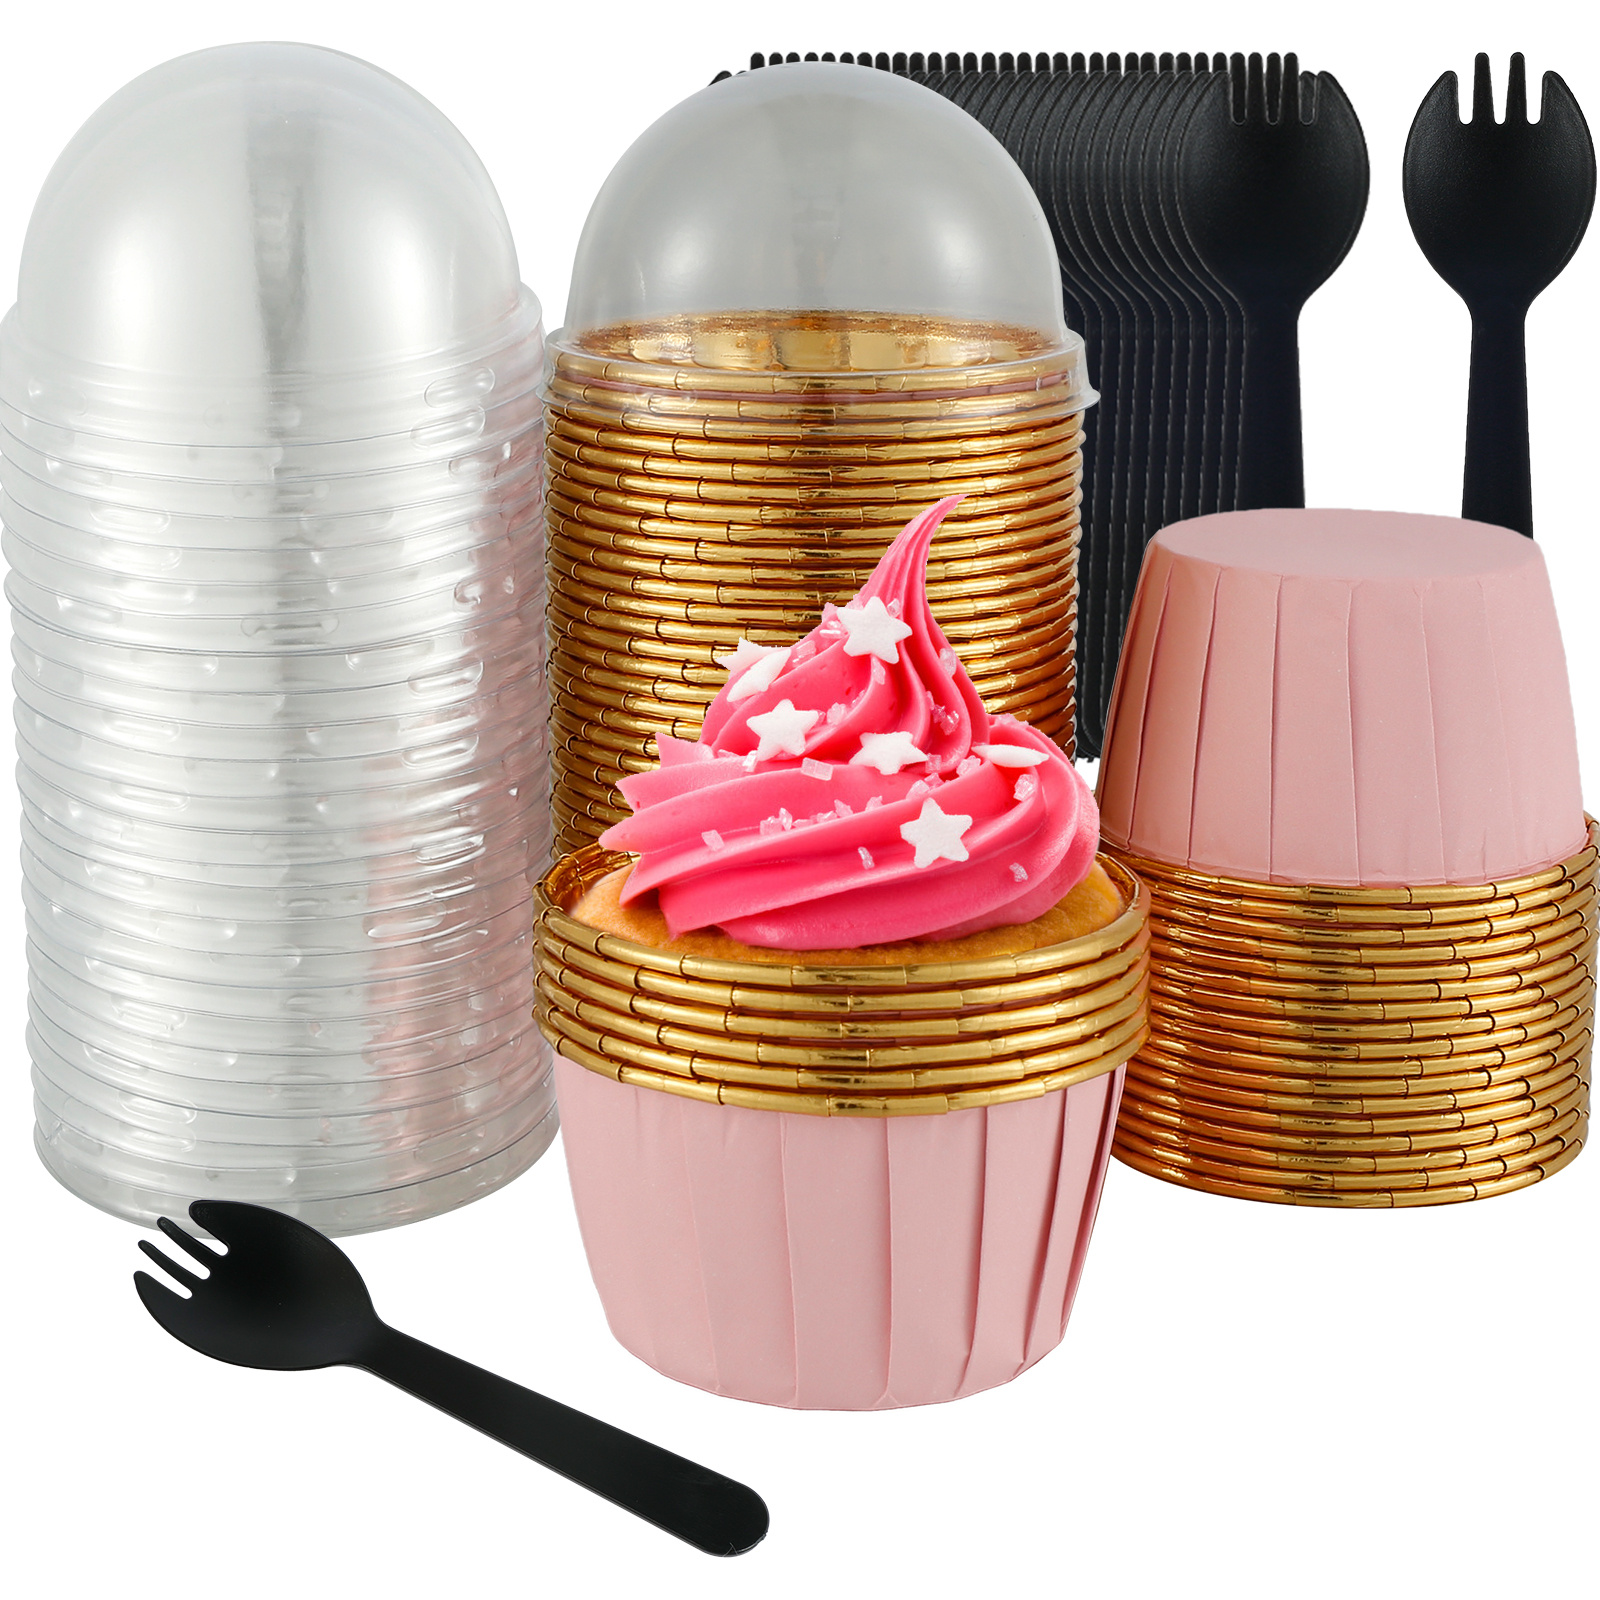 Copper Foil Cupcake Liners qty 50 See Special Notes Copper Foil Baking Cup,  Copper Foil Cupcake Papers, Copper Foil Cupcake Wrappers 